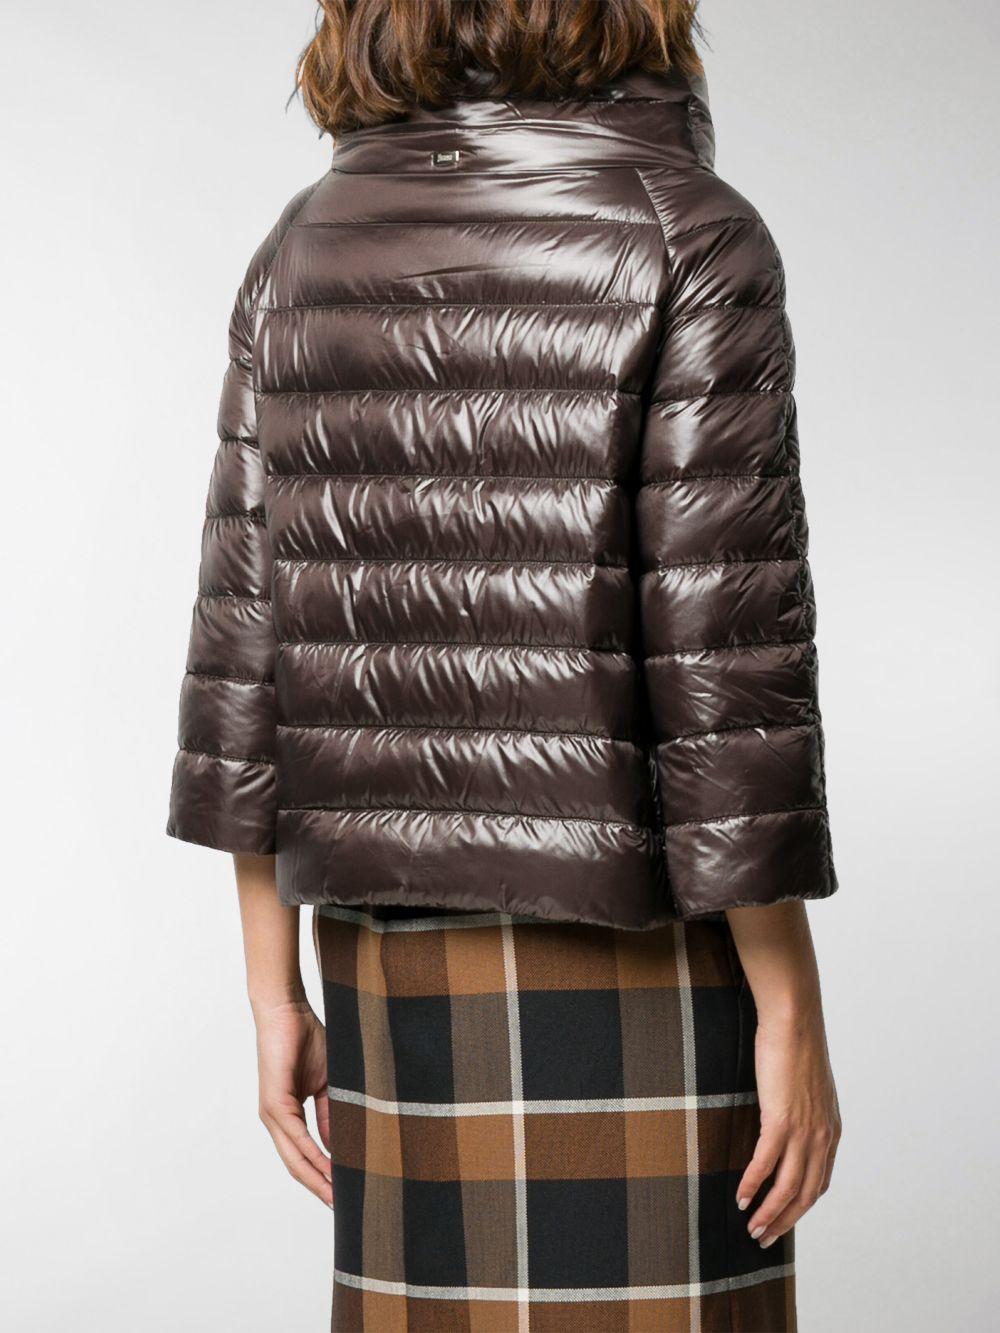 Herno Sofia Cropped Puffer Jacket in Brown - Lyst